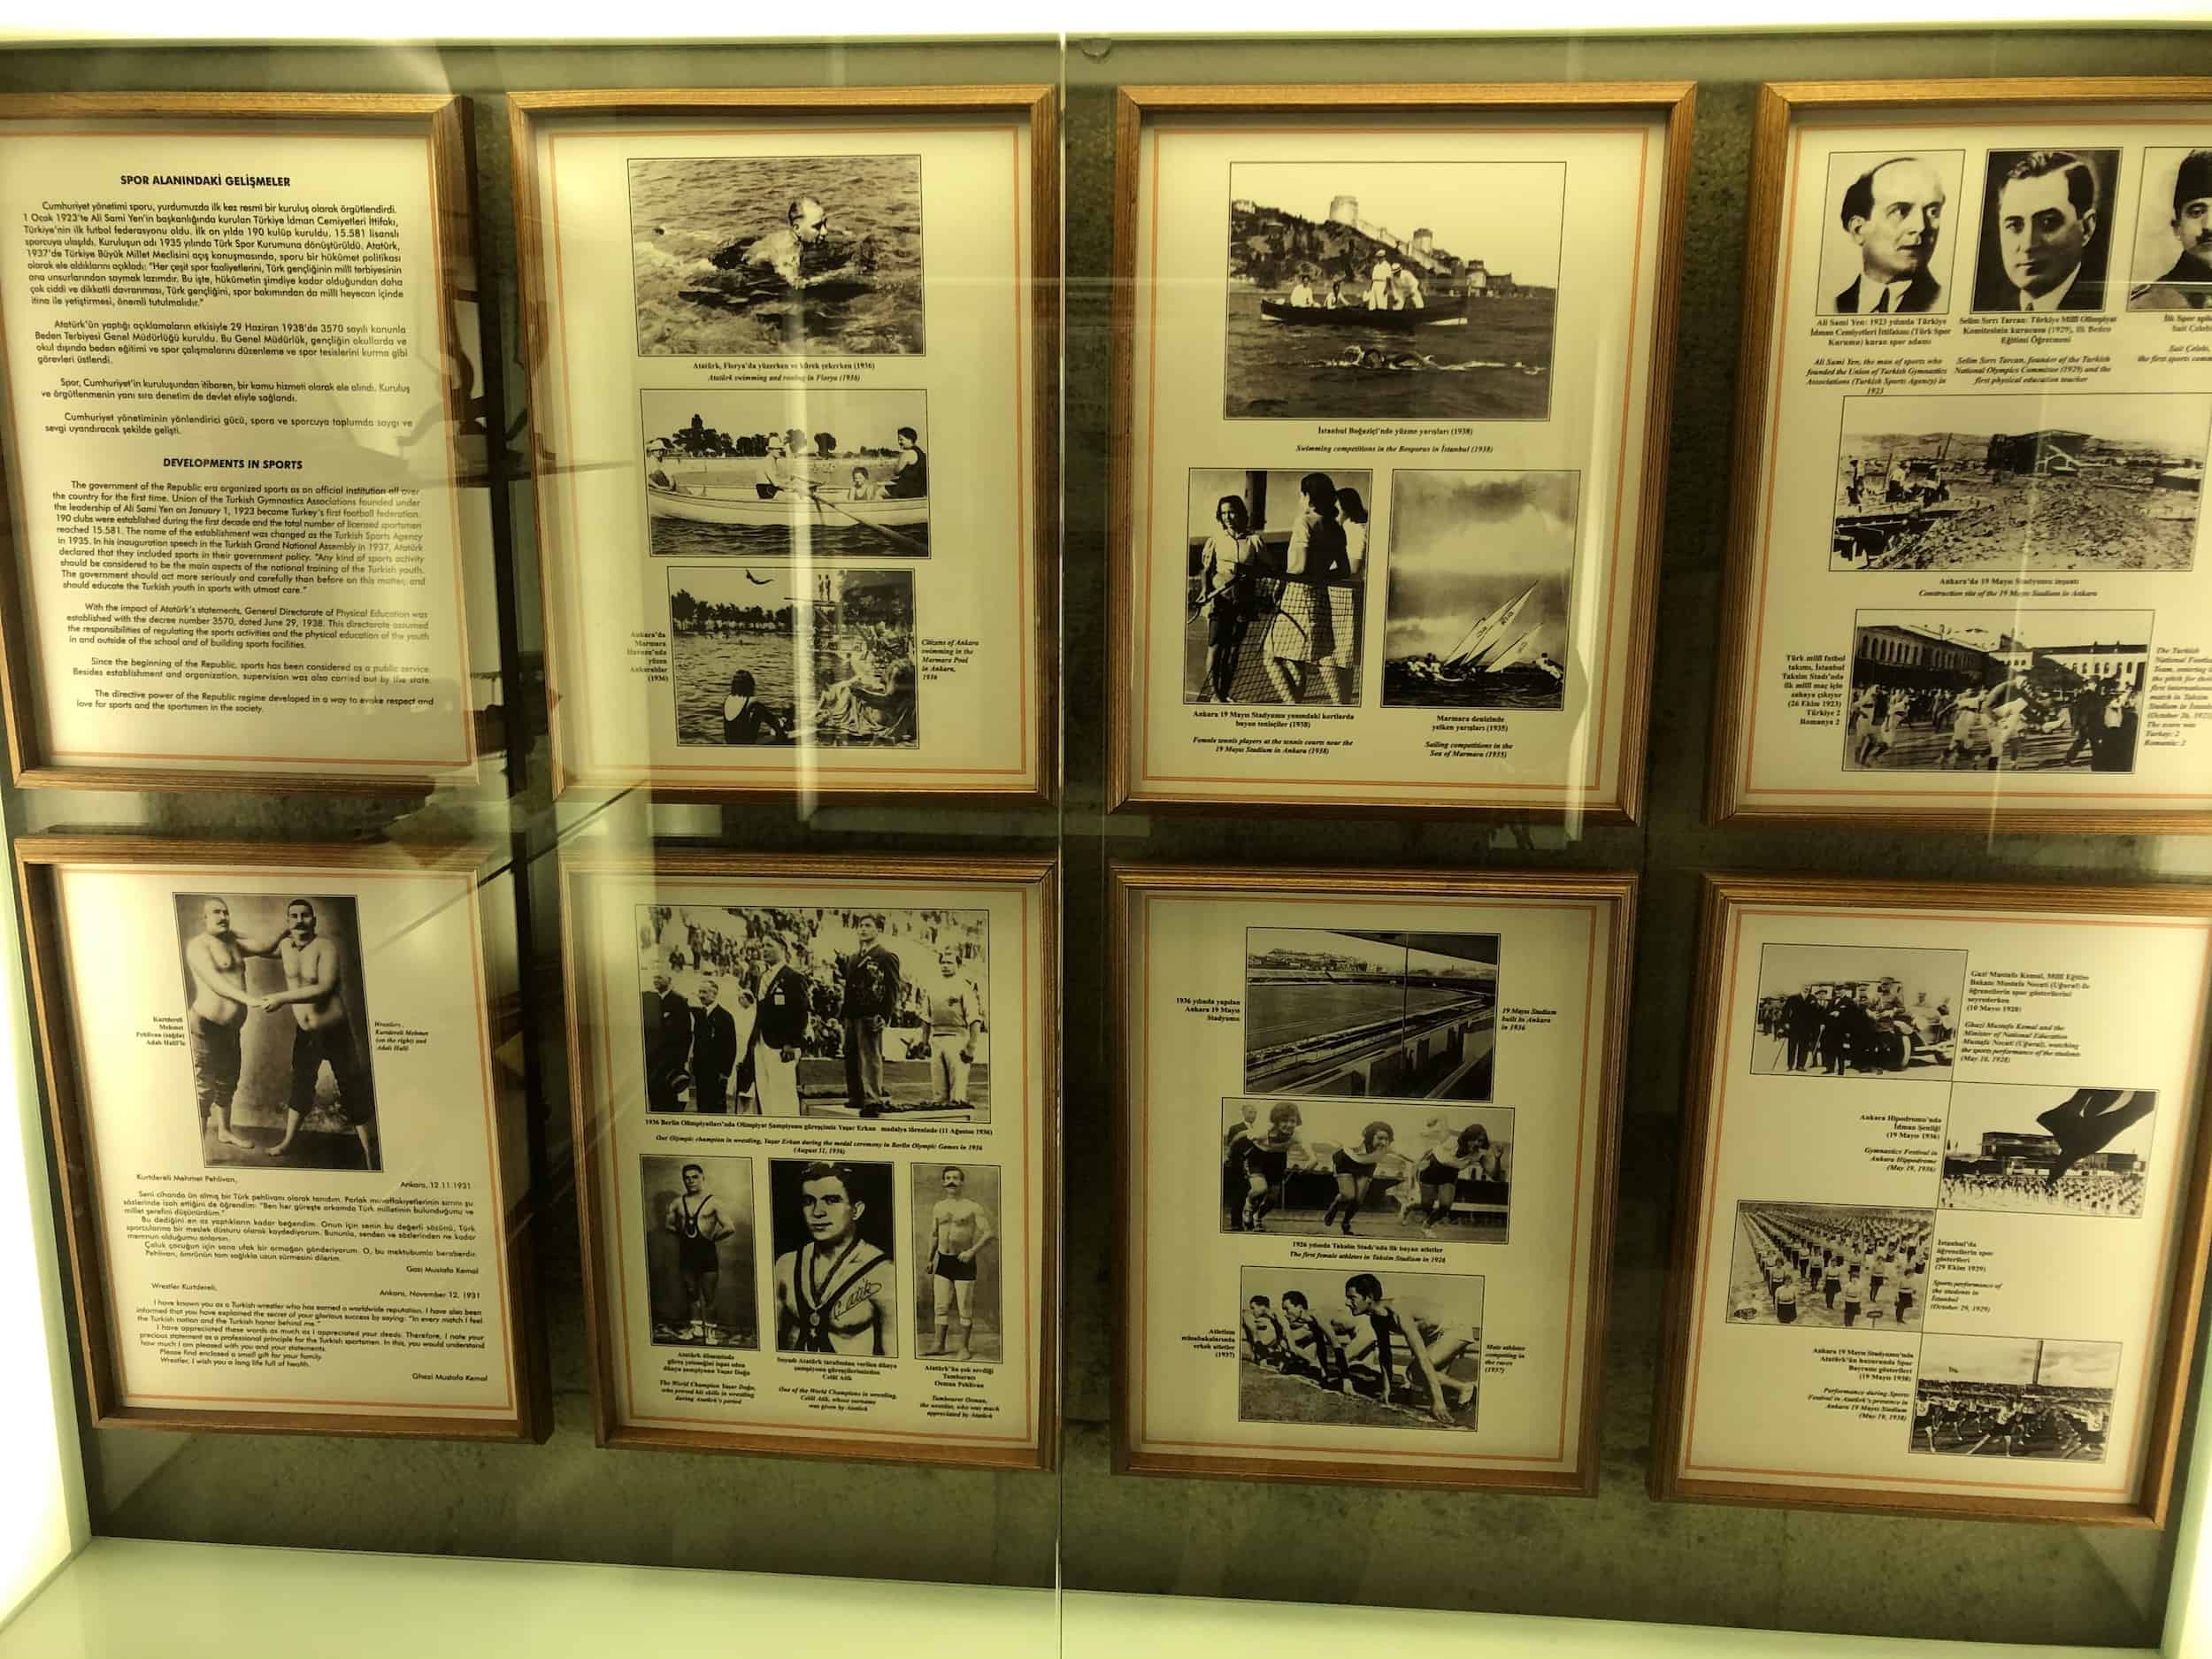 Developments in sports at the Atatürk and War of Independence Museum